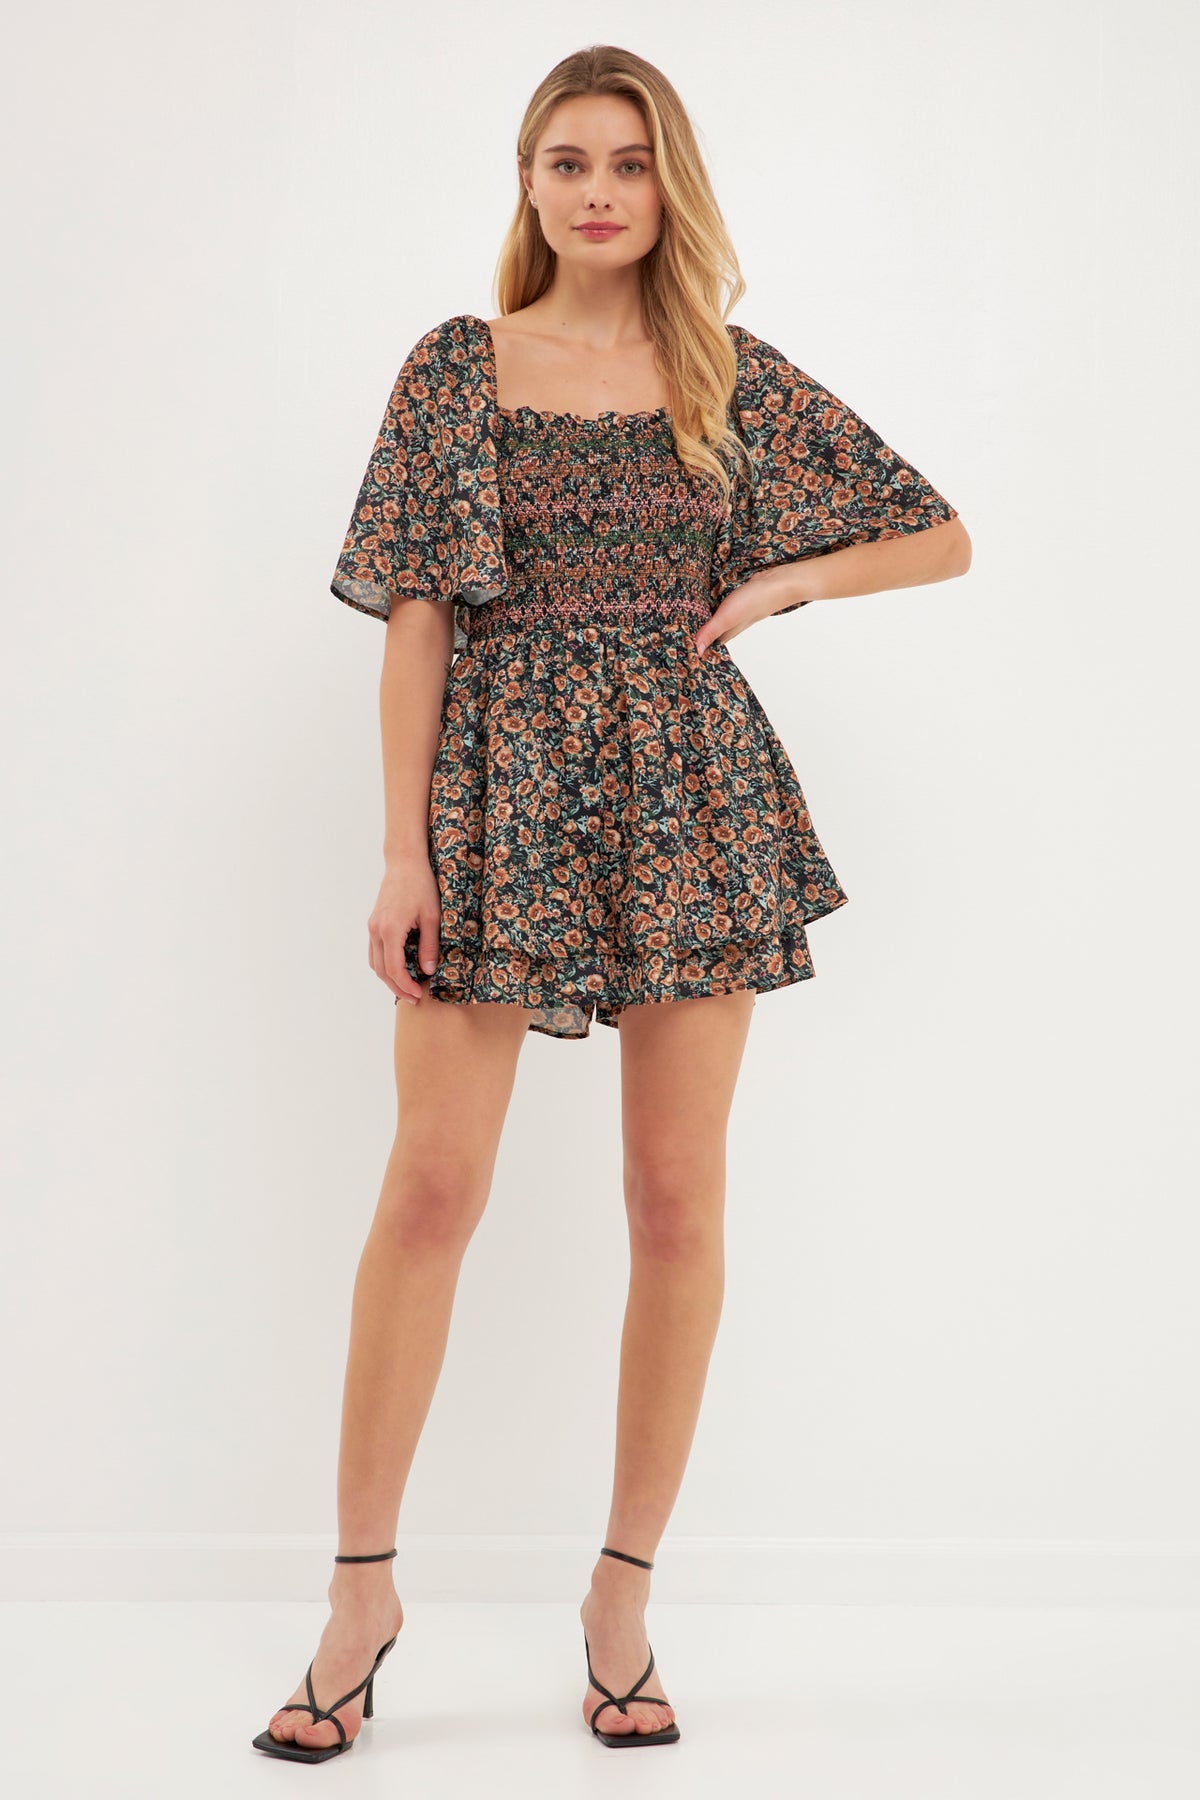 FREE THE ROSES - Smocked Detail Romper - ROMPERS available at Objectrare